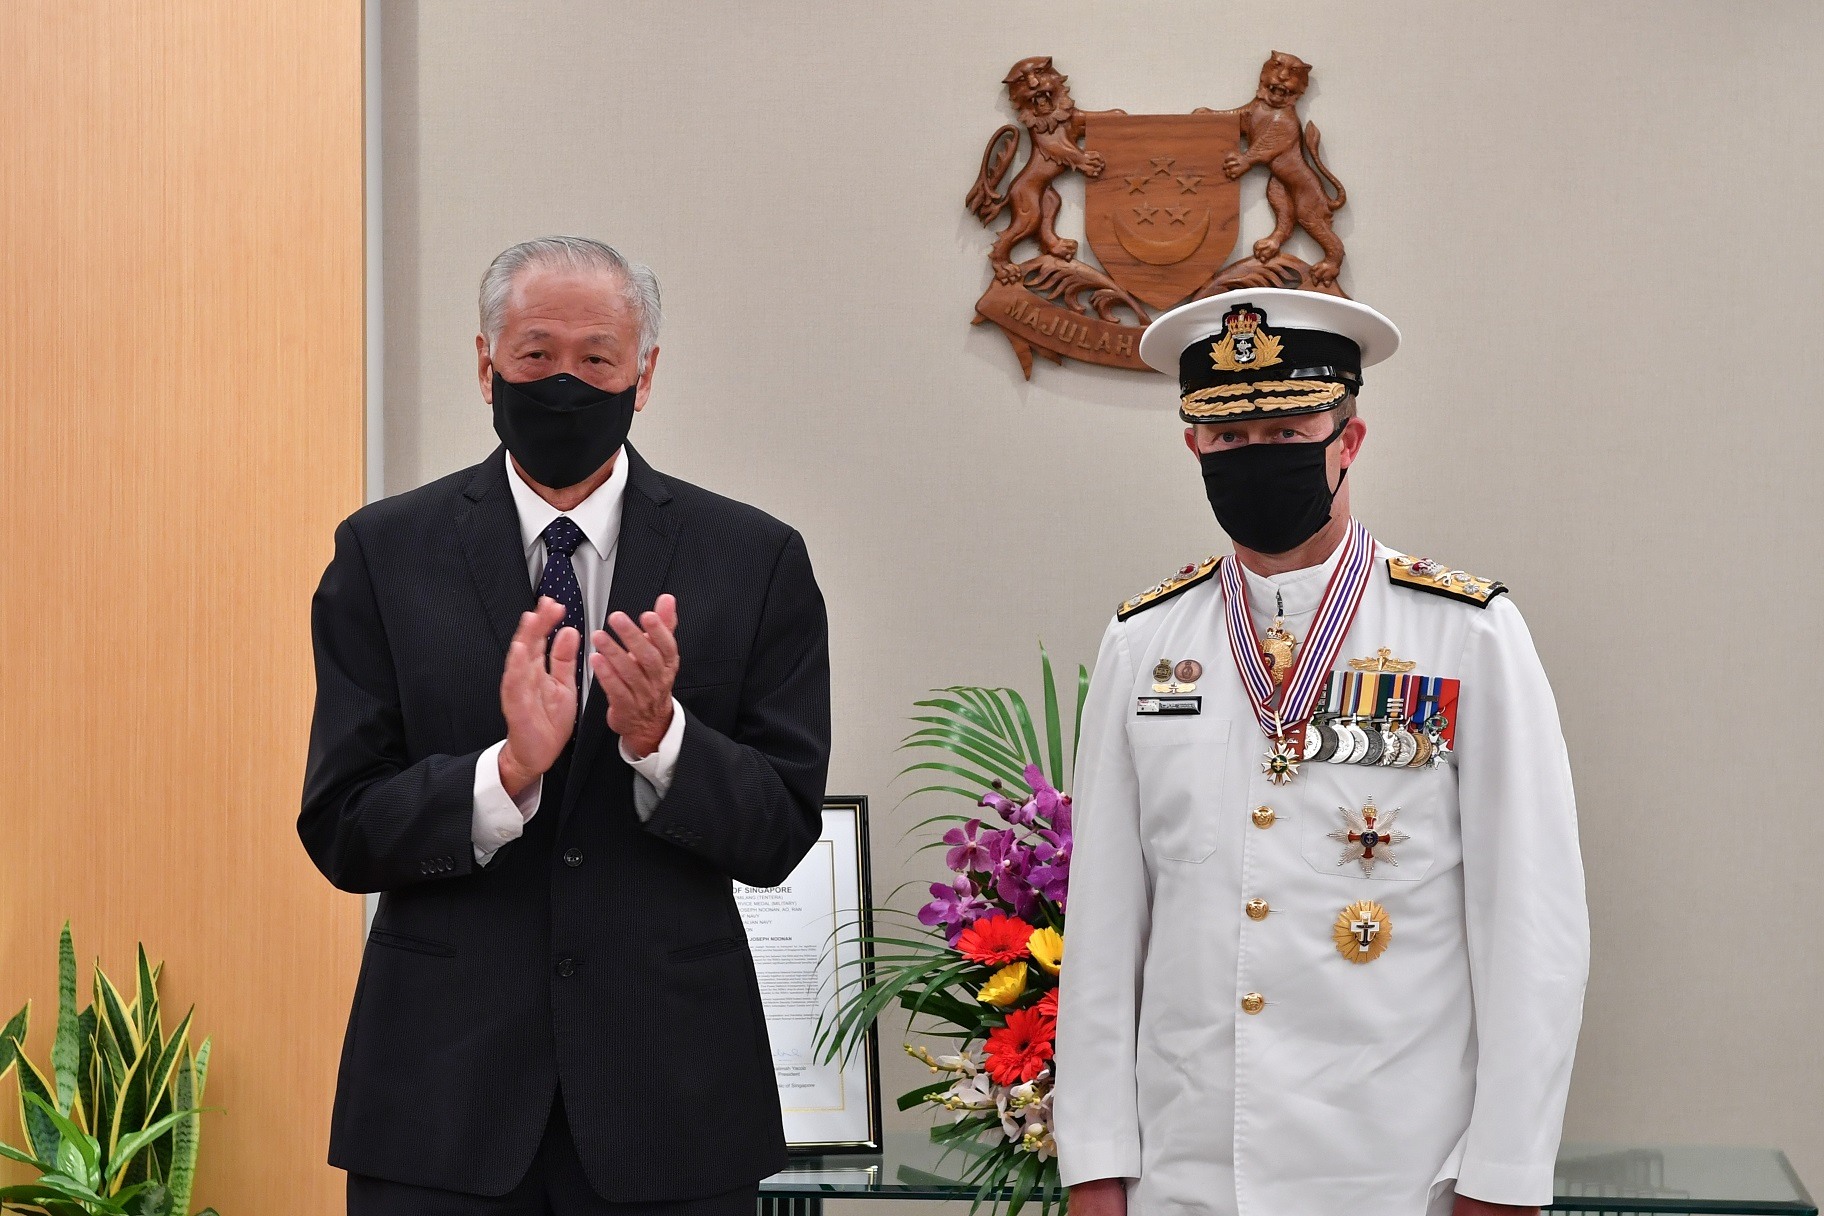 Chief of the Royal Australian Navy Vice Admiral (VADM) Michael Noonan (right) was presented the Meritorious Service Medal (Military) by Minister for Defence Dr Ng Eng Hen (left) at the Ministry of Defence (MINDEF).